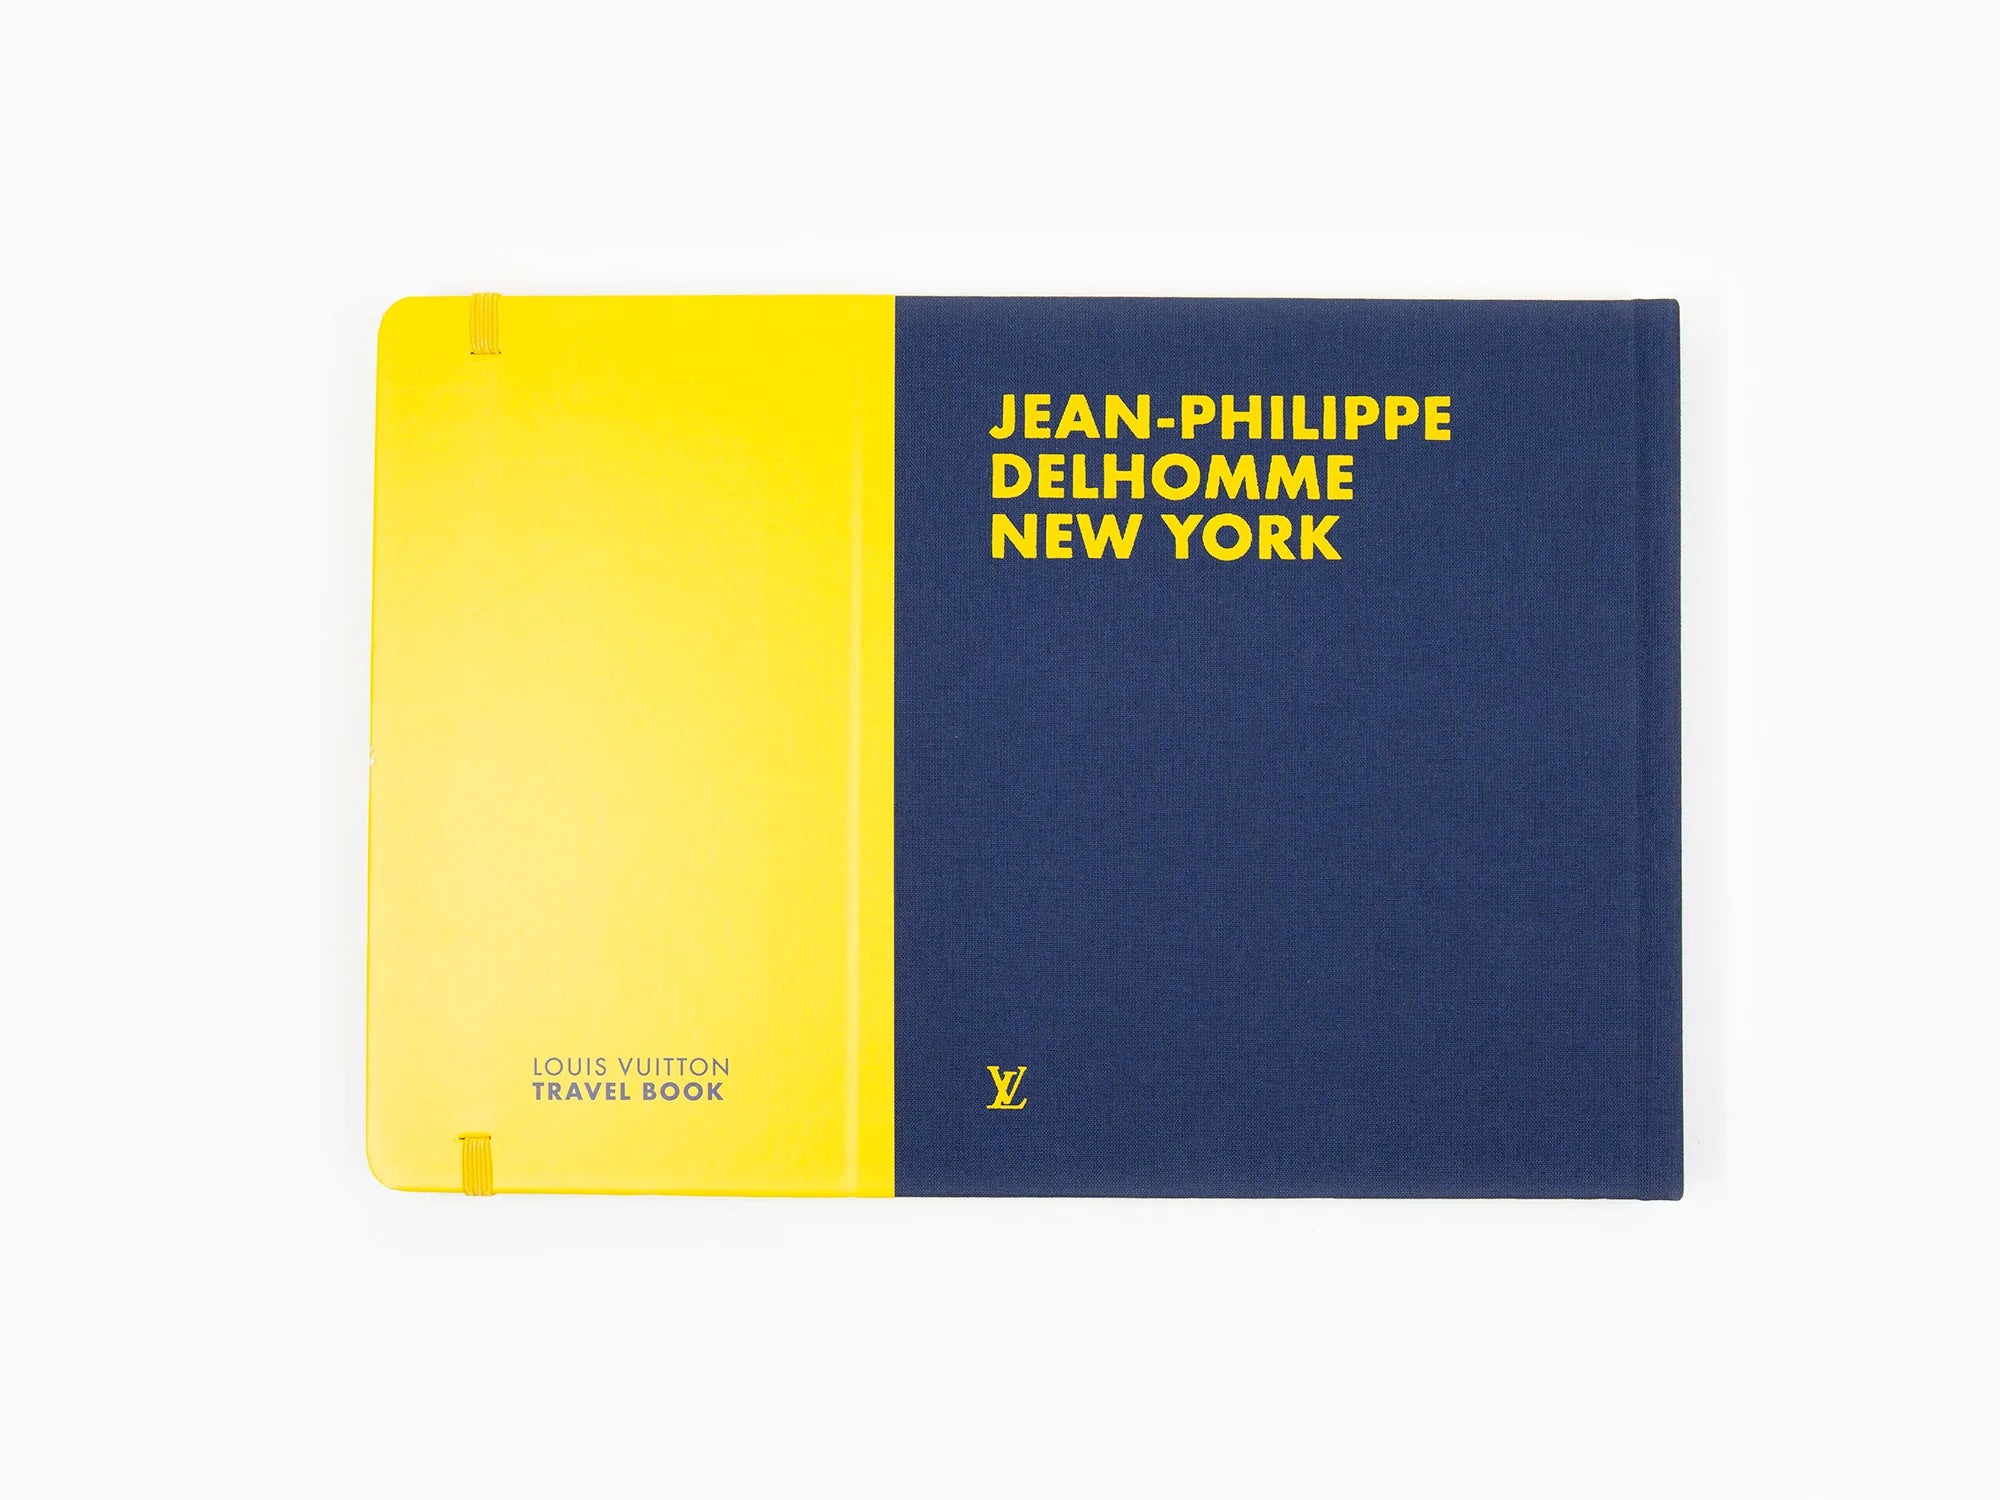 Louis Vuitton Travel Book - Jean-Philippe Delhomme New York for Sale in New  York, NY - OfferUp